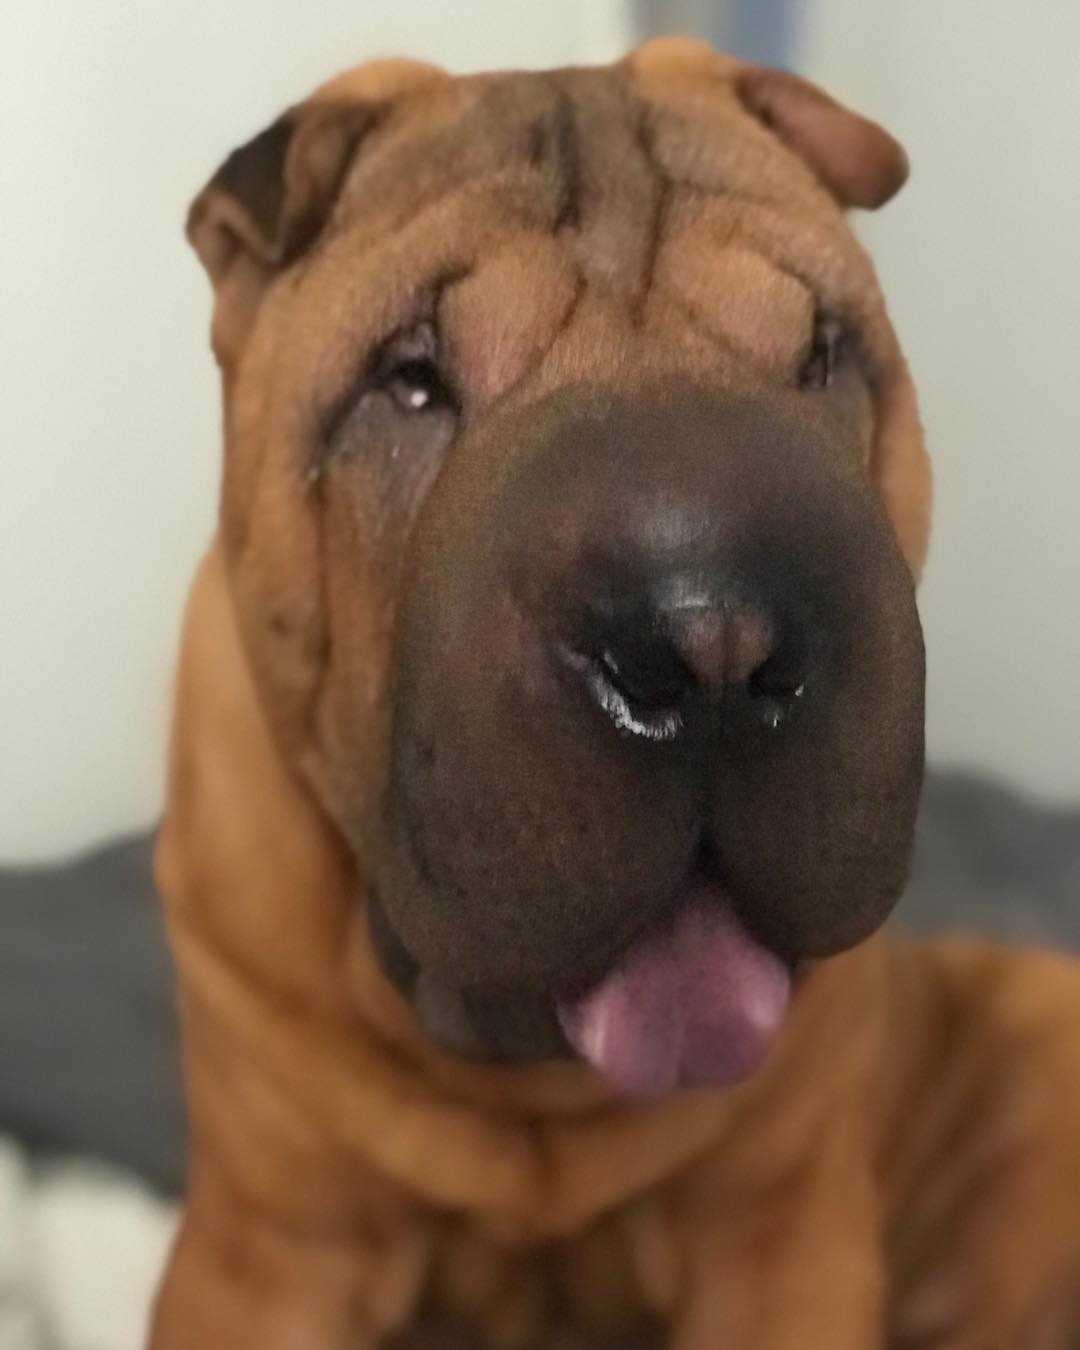 A Shar Pei sitting on the bed with its tongue out